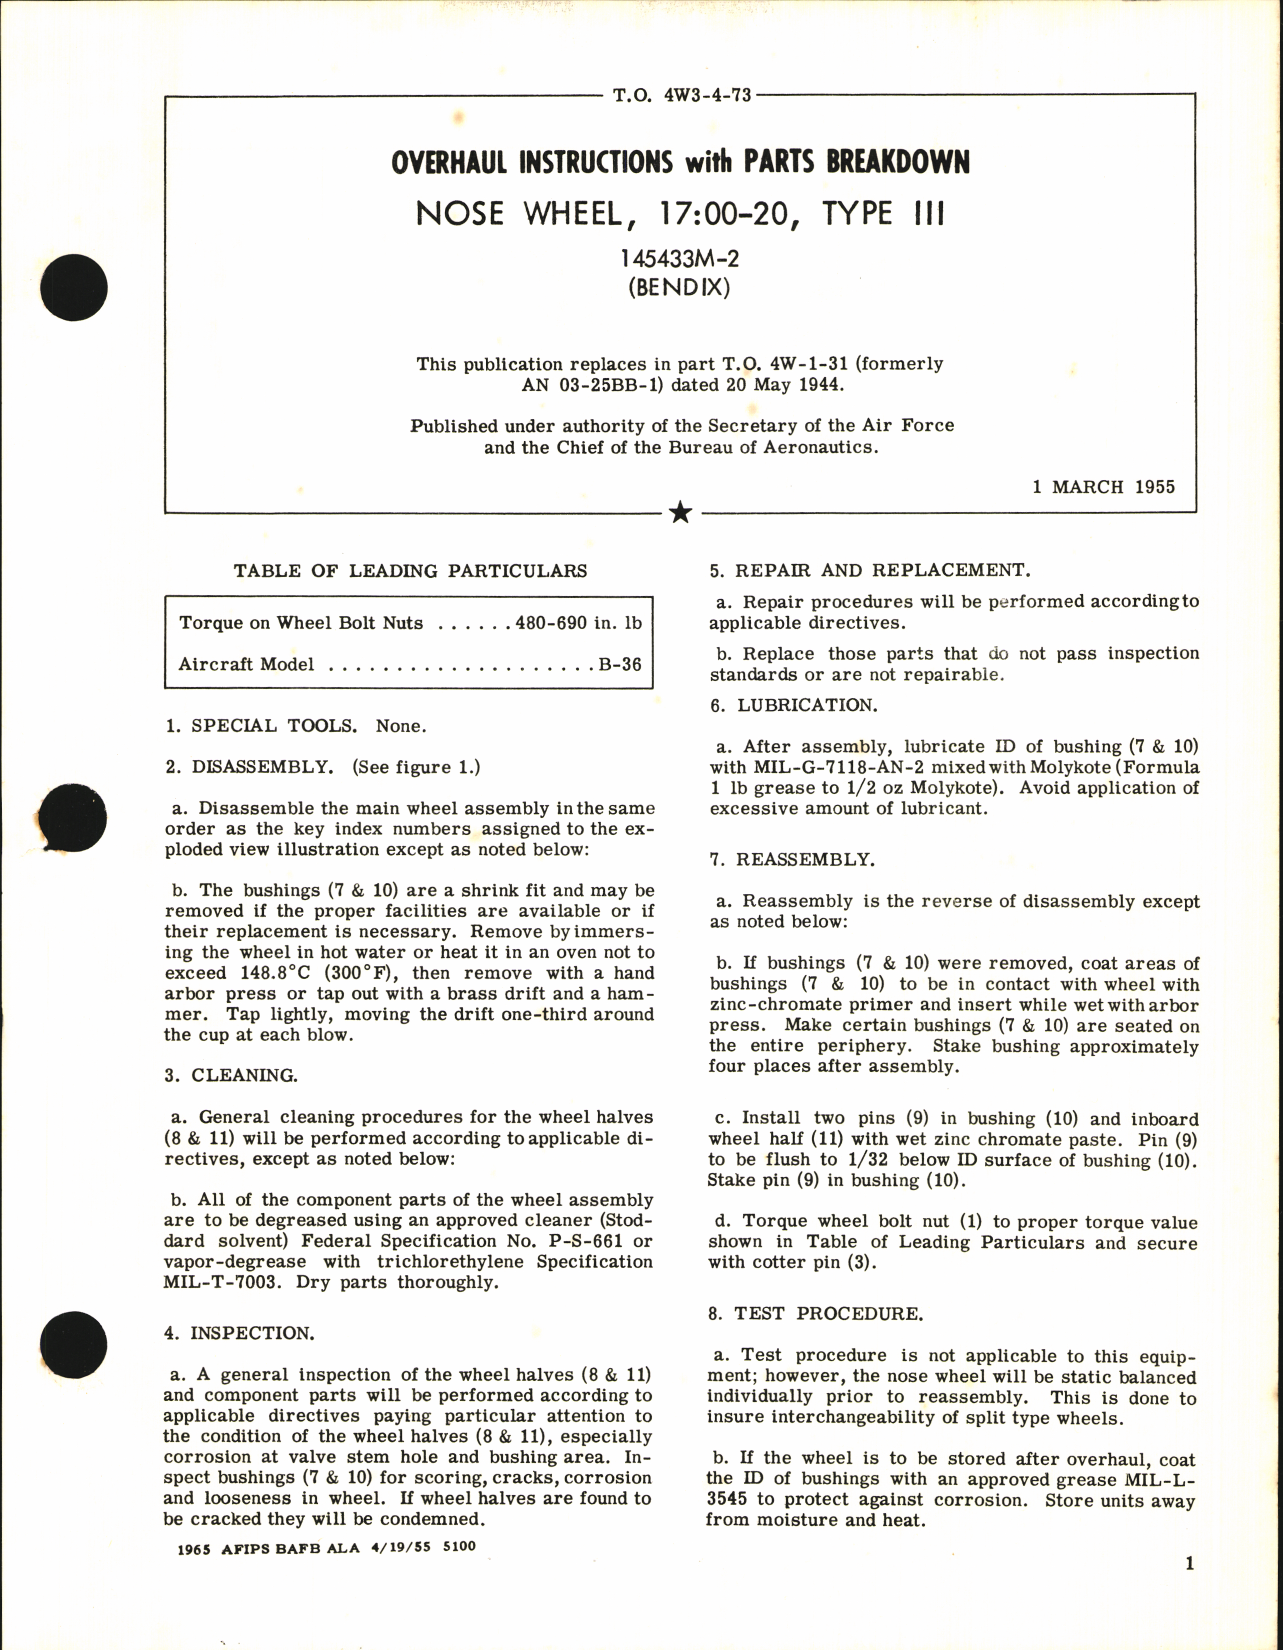 Sample page 1 from AirCorps Library document: Overhaul Instructions with Parts Breakdown for Nose Wheel 17:00-20, Type III